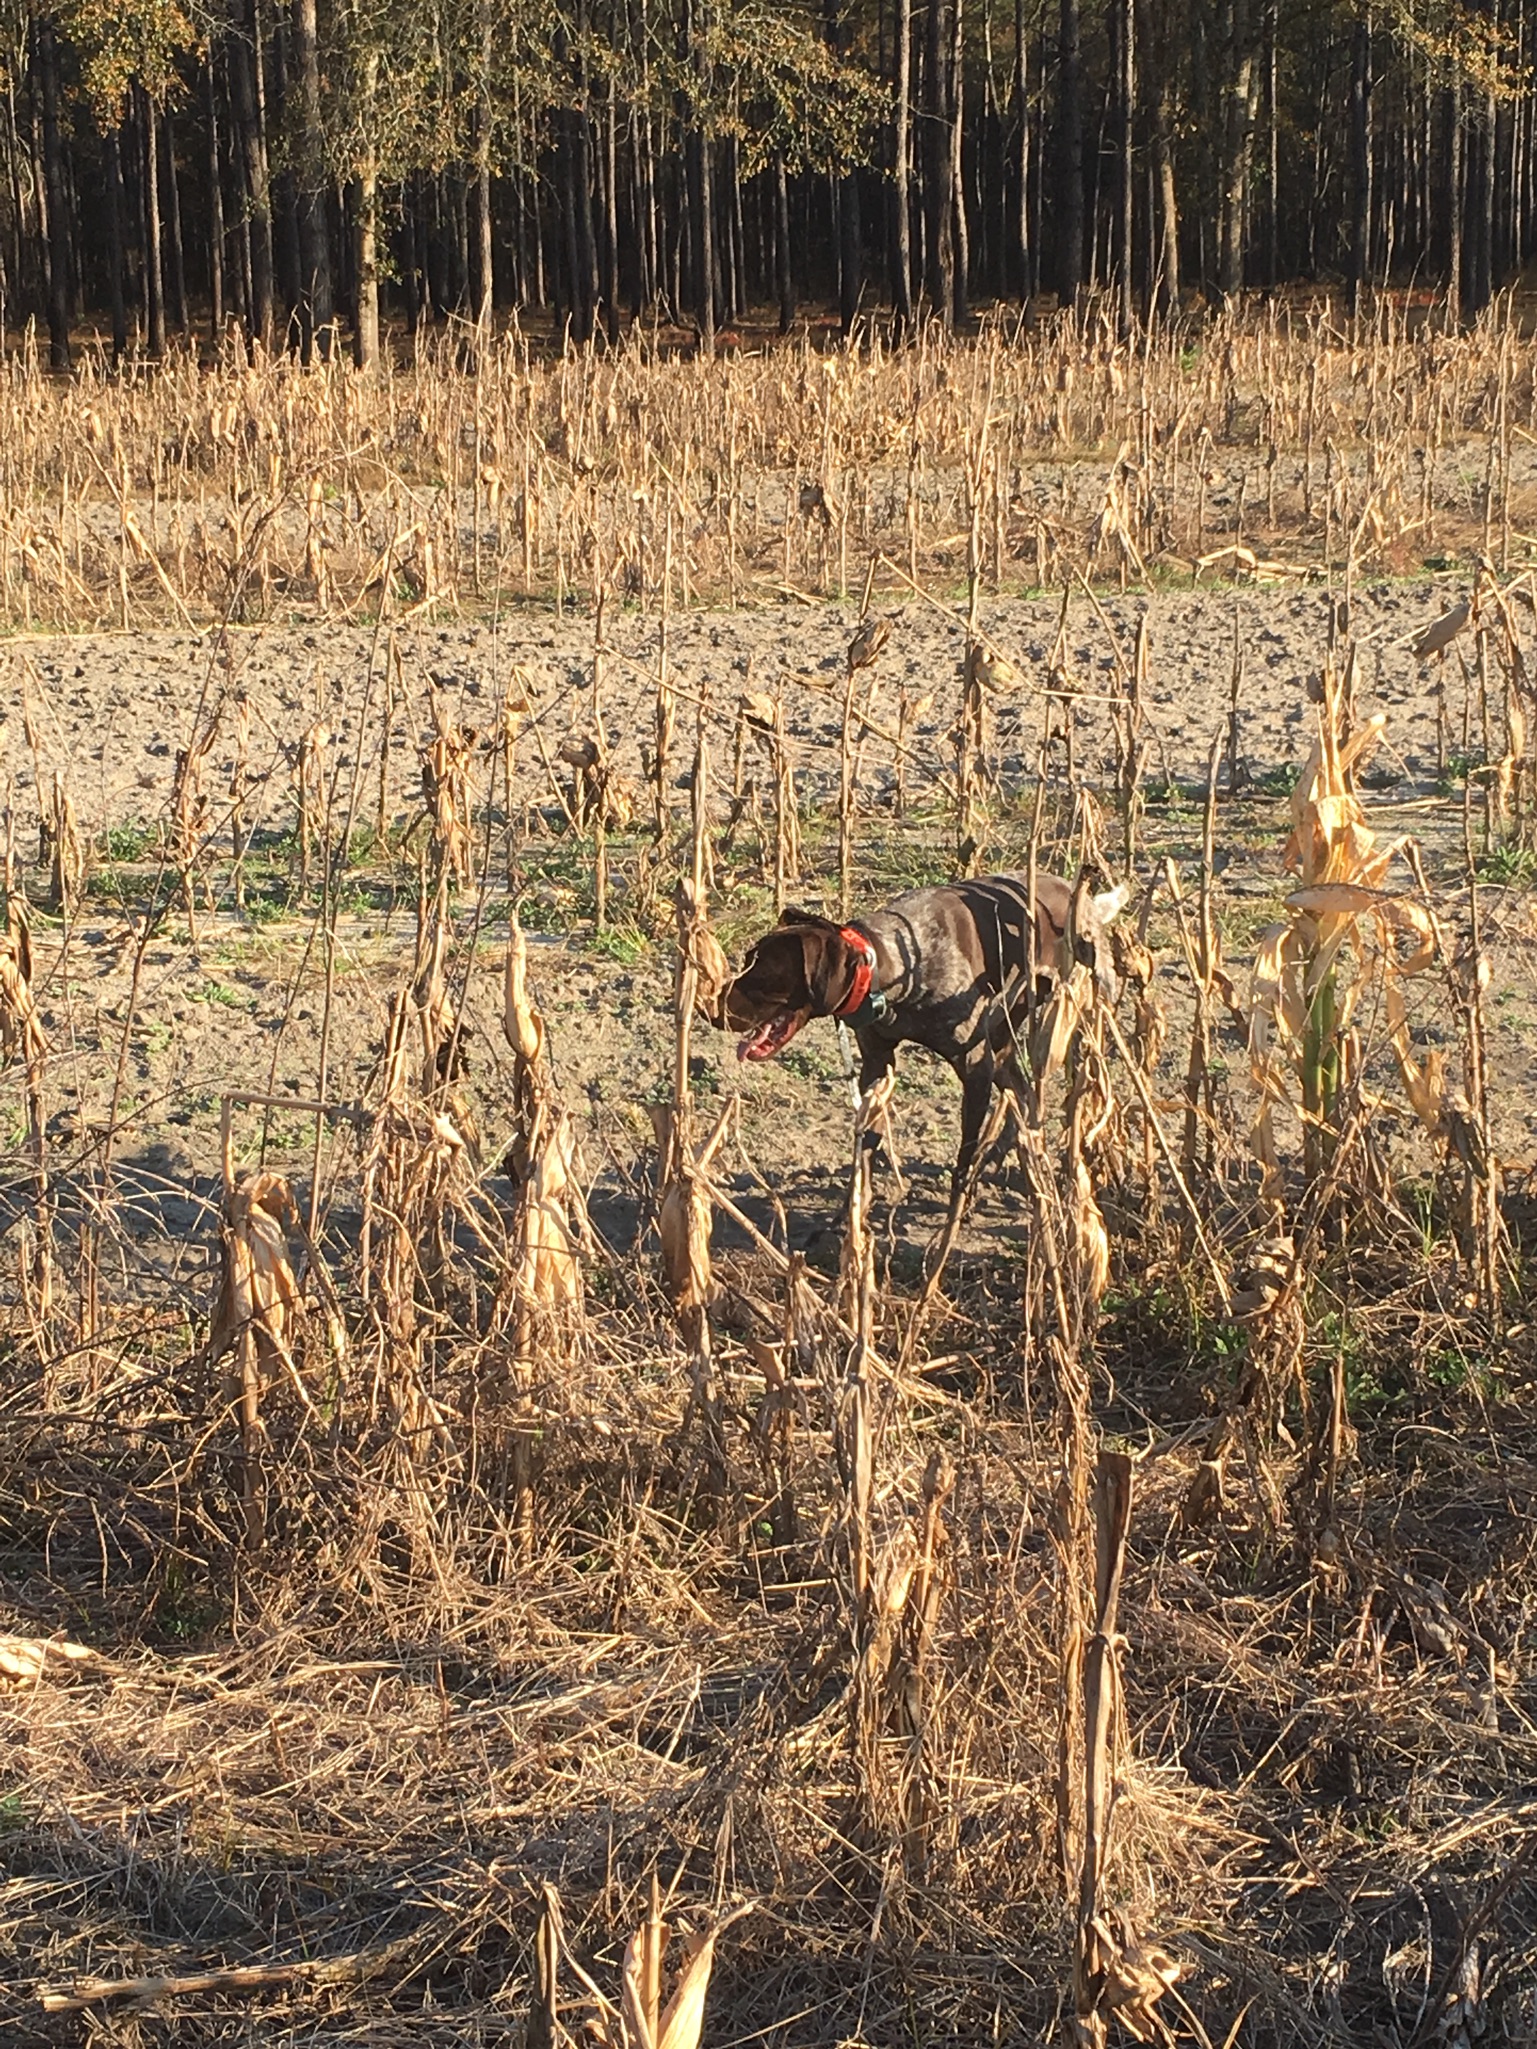 Maintained fields with corn planted for the quail.